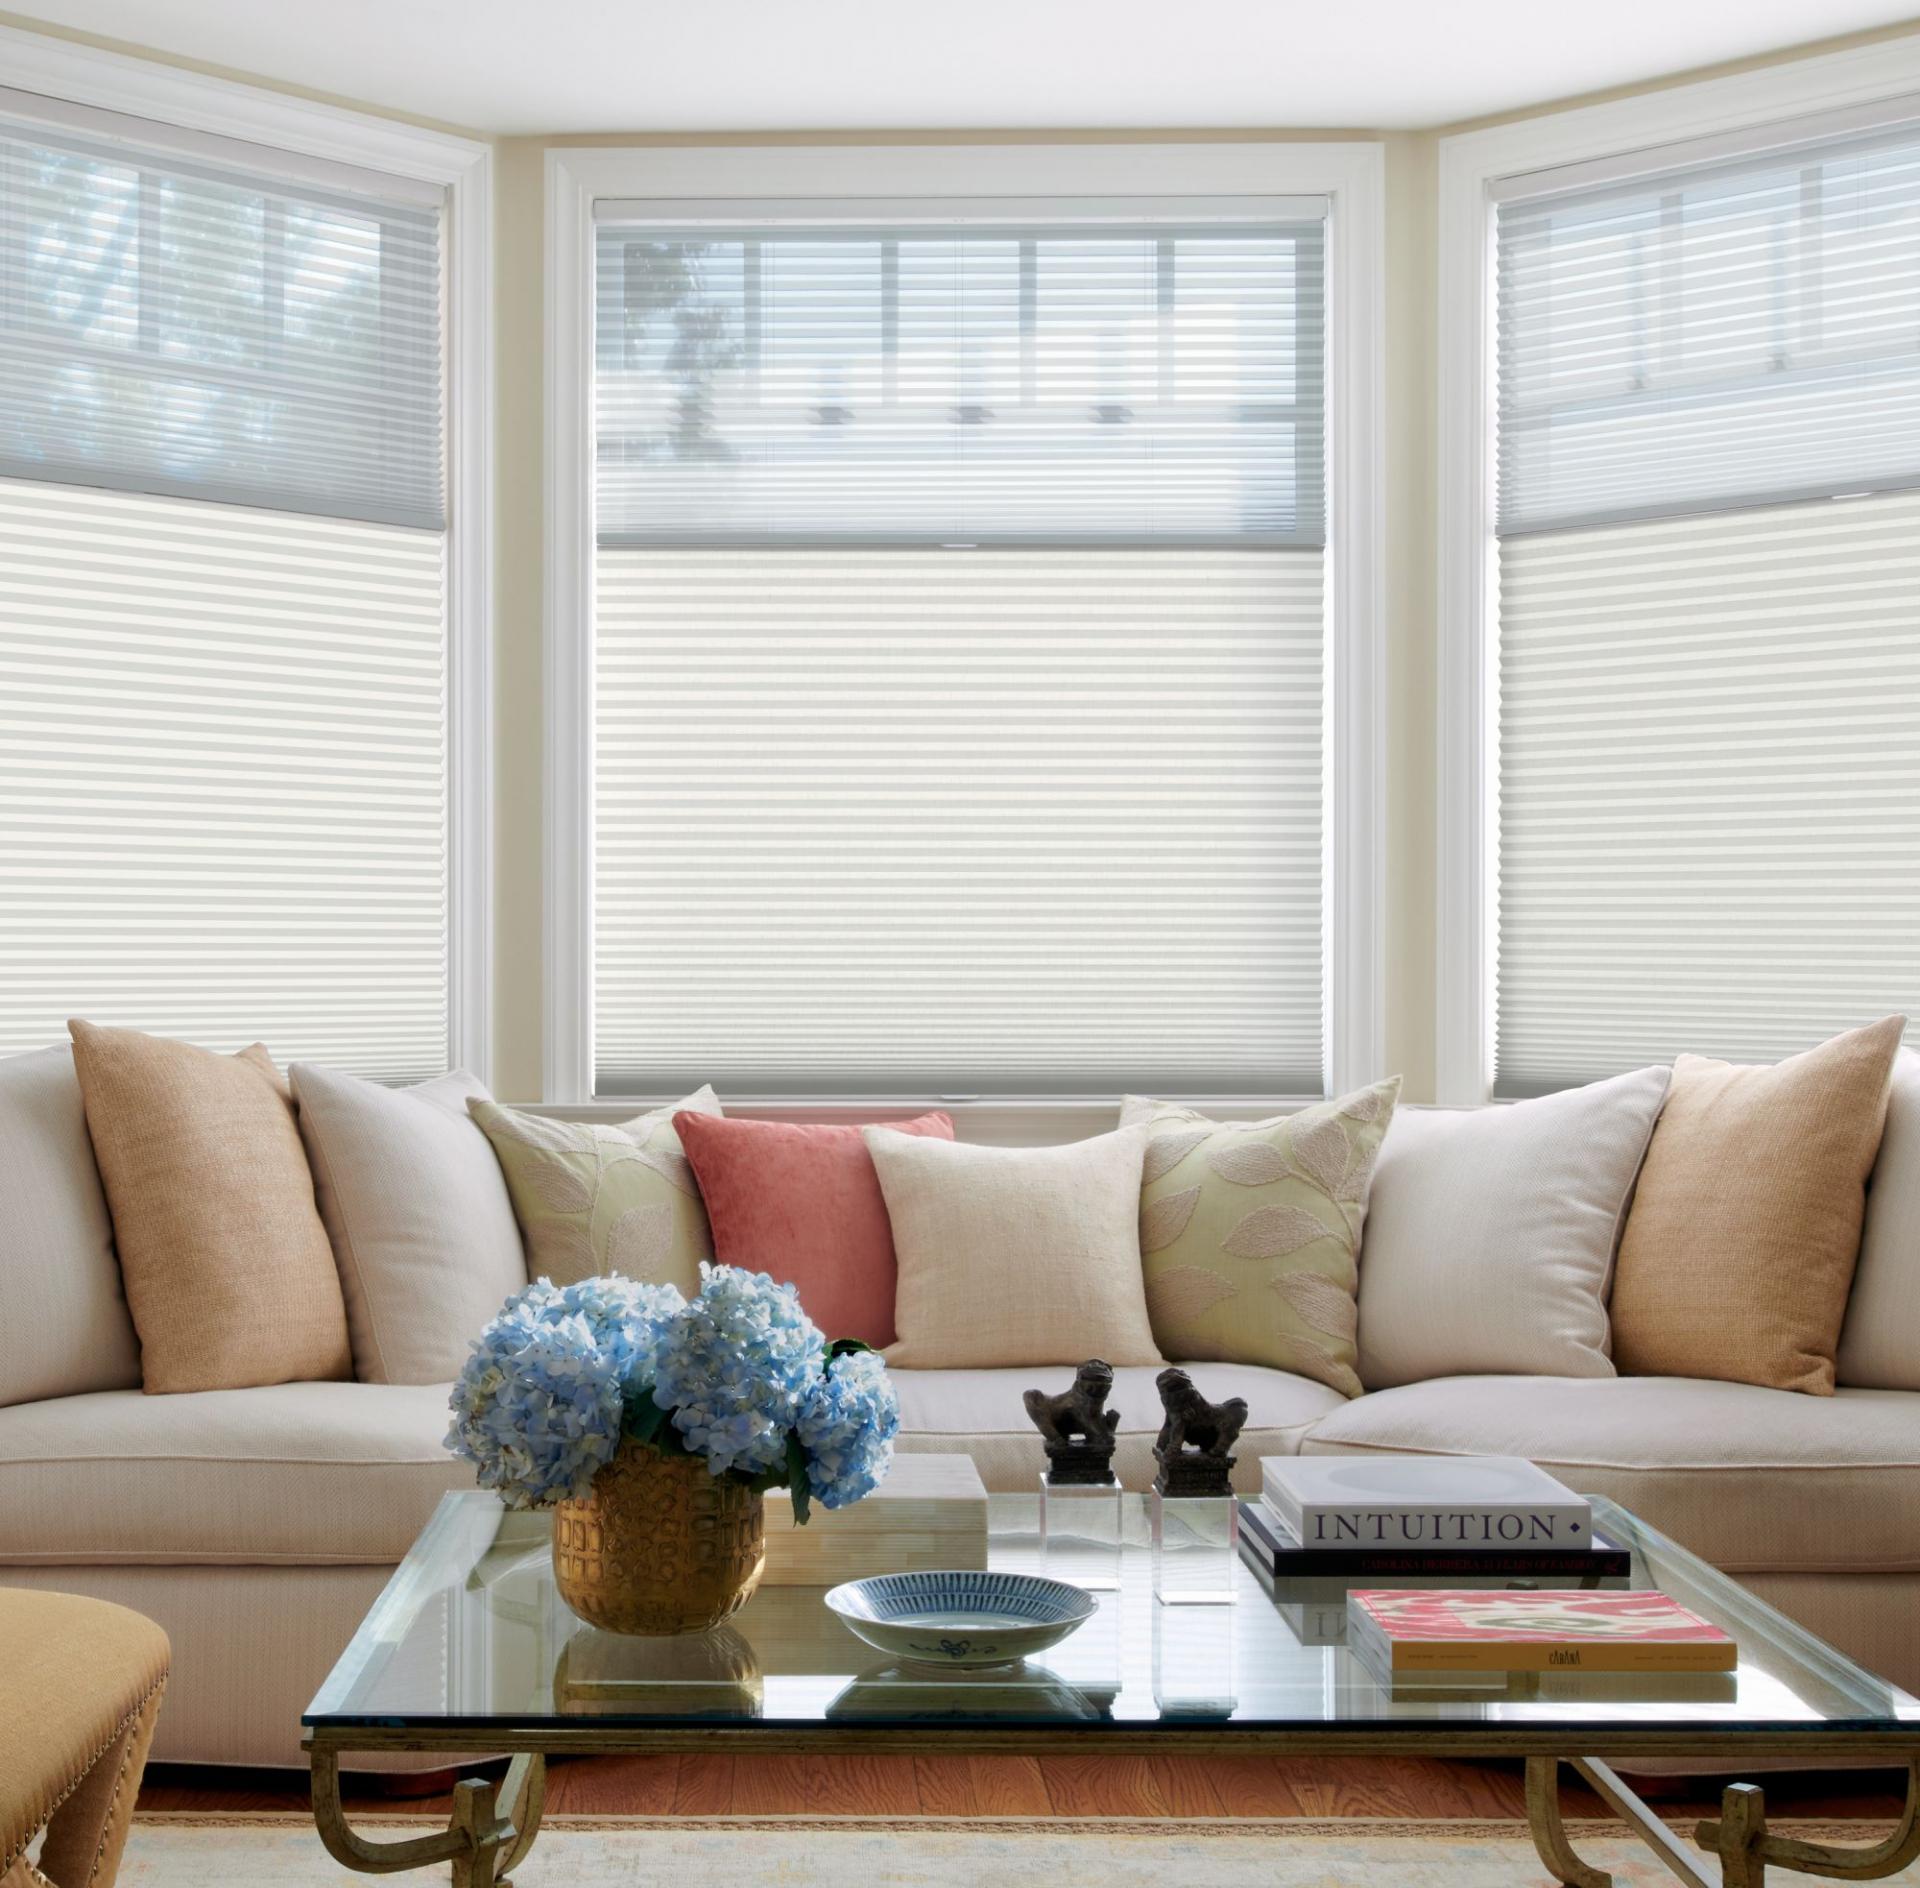 Introduce Smart Window Treatments to Your Home